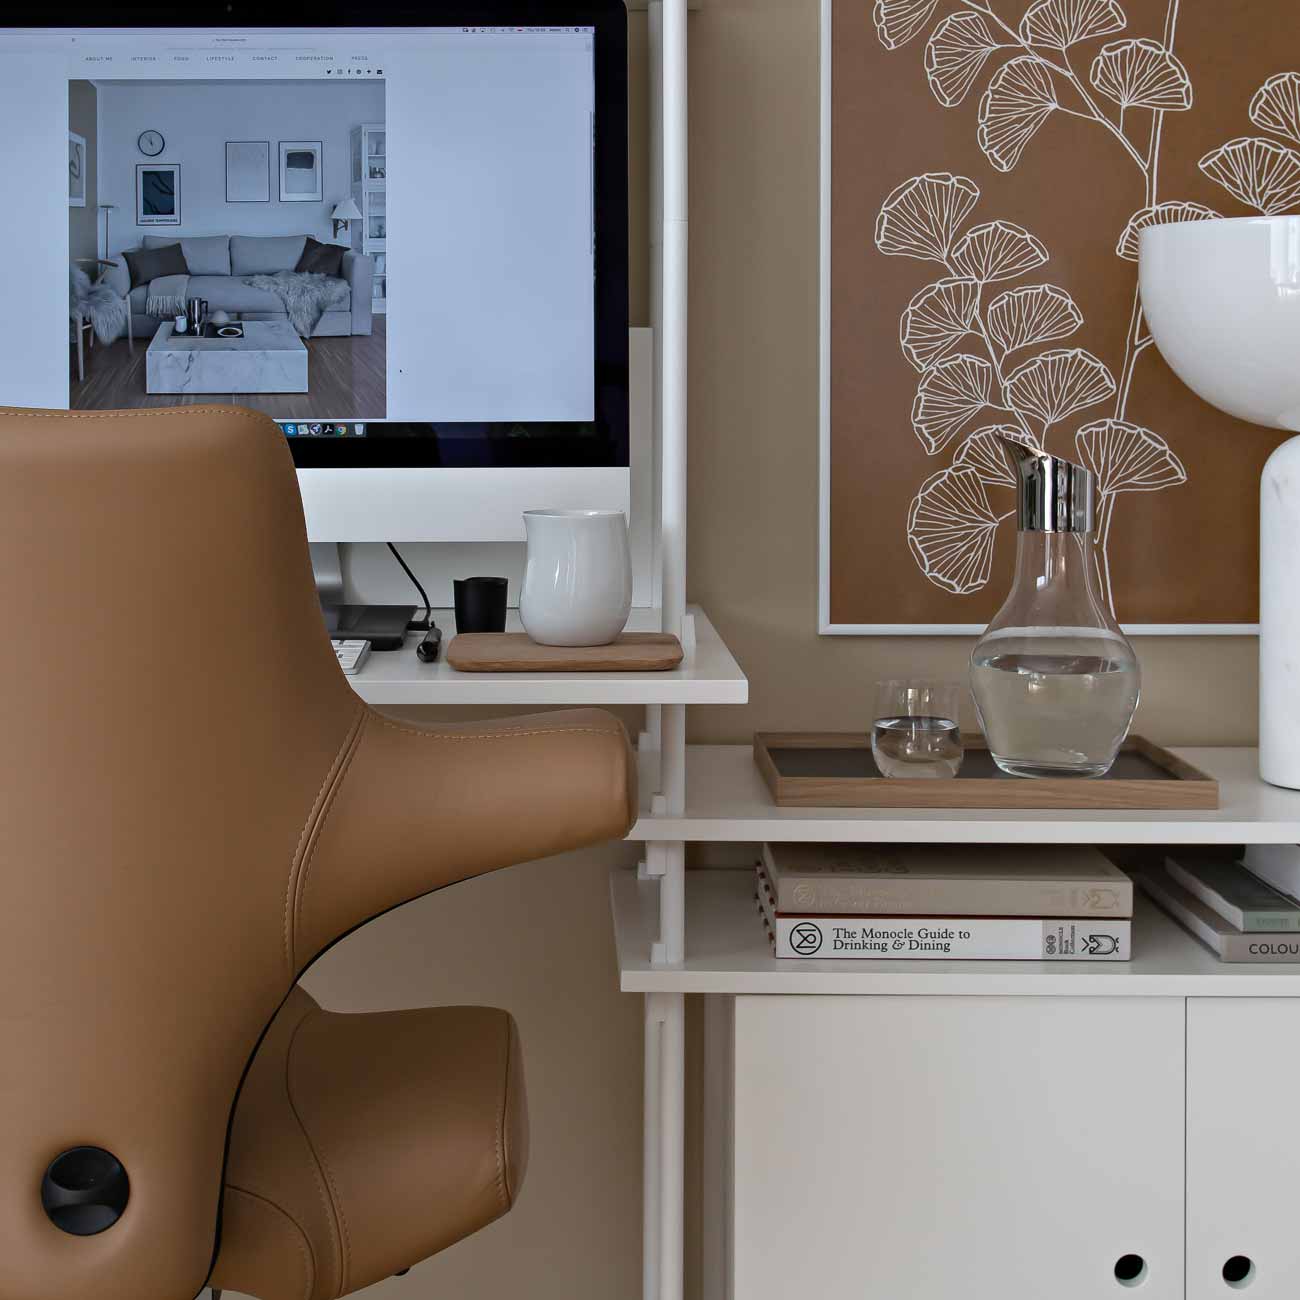 HÅG Capisco chair in brown Paloma camel leather at home office desk